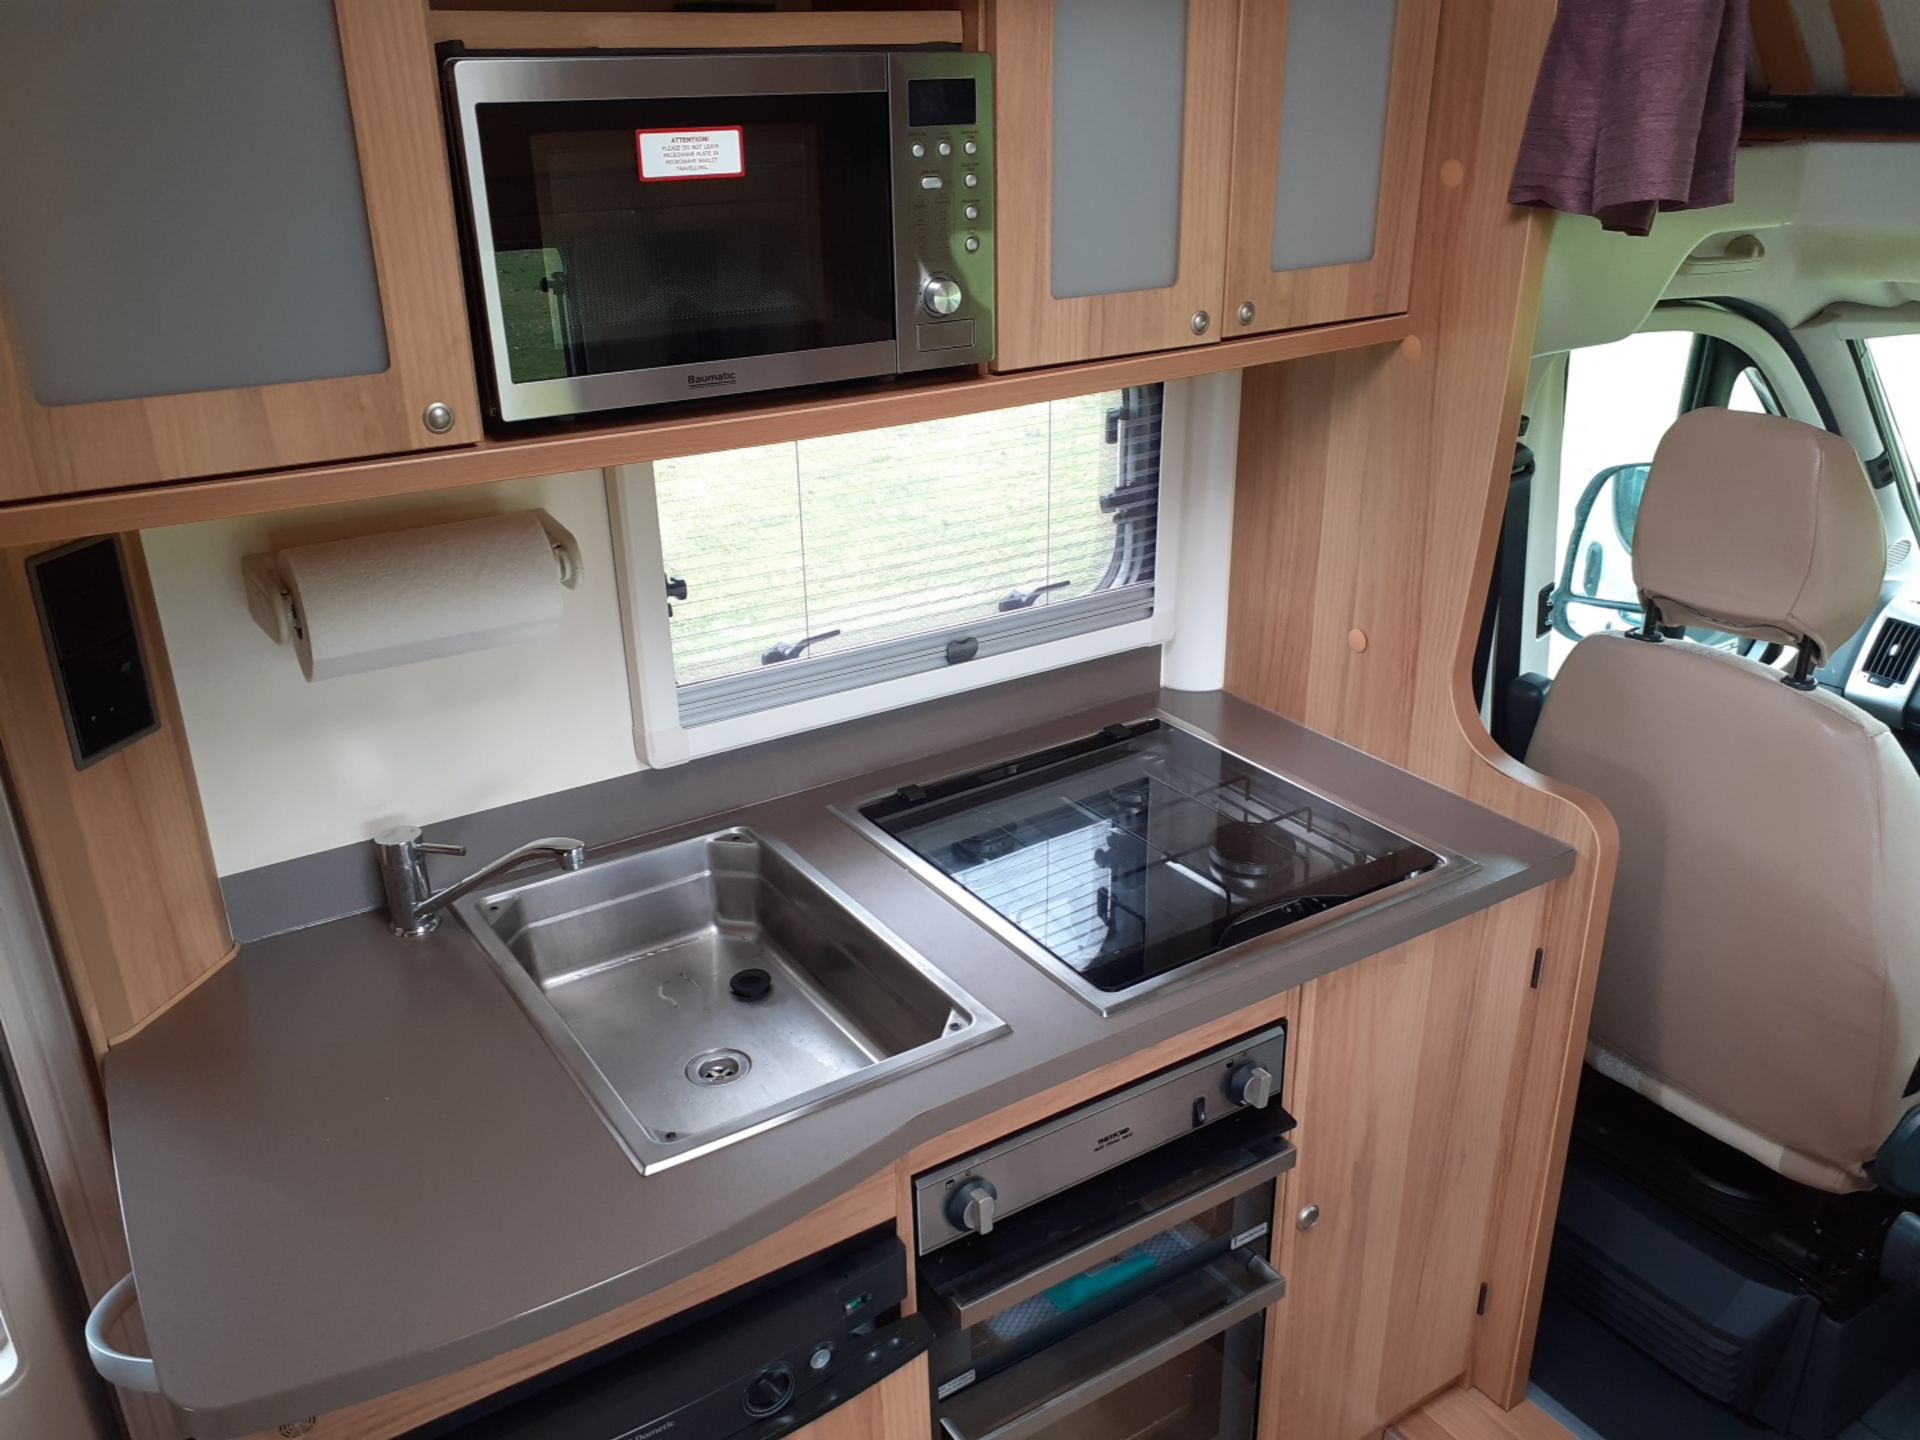 2012 BAILEY APPROACH 760 SE LUXURY 6 BERTH MOTORHOME £10K OF EXTRAS, 30,000 MILES FROM NEW - Image 16 of 31